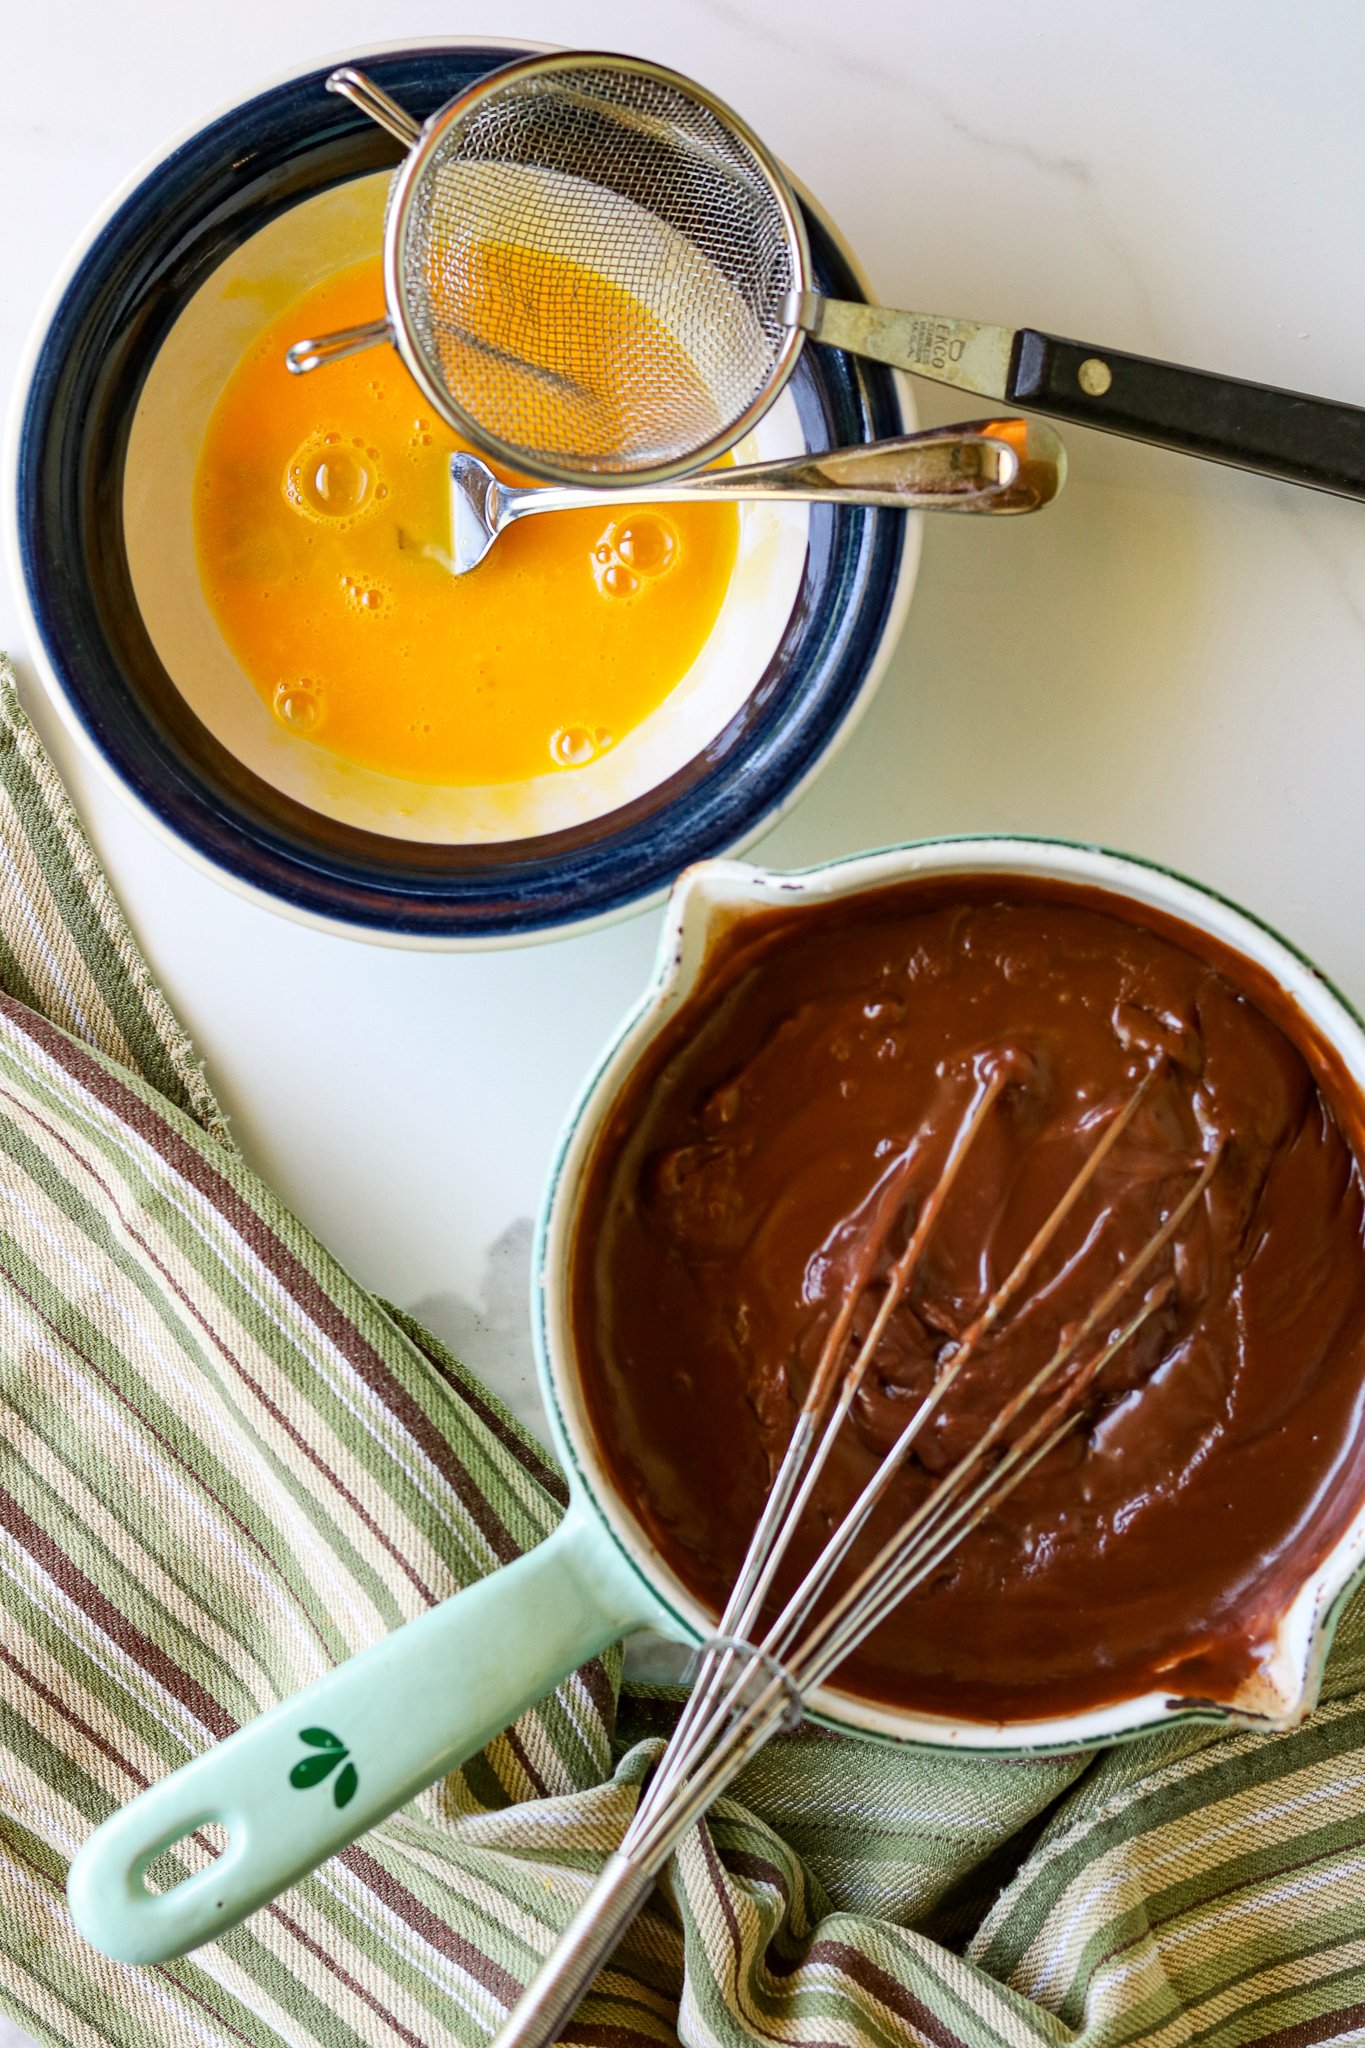 A bowl lwith egg yolks and a strainer next to a saucepan of Chocolate Bunny Pie filling in it.